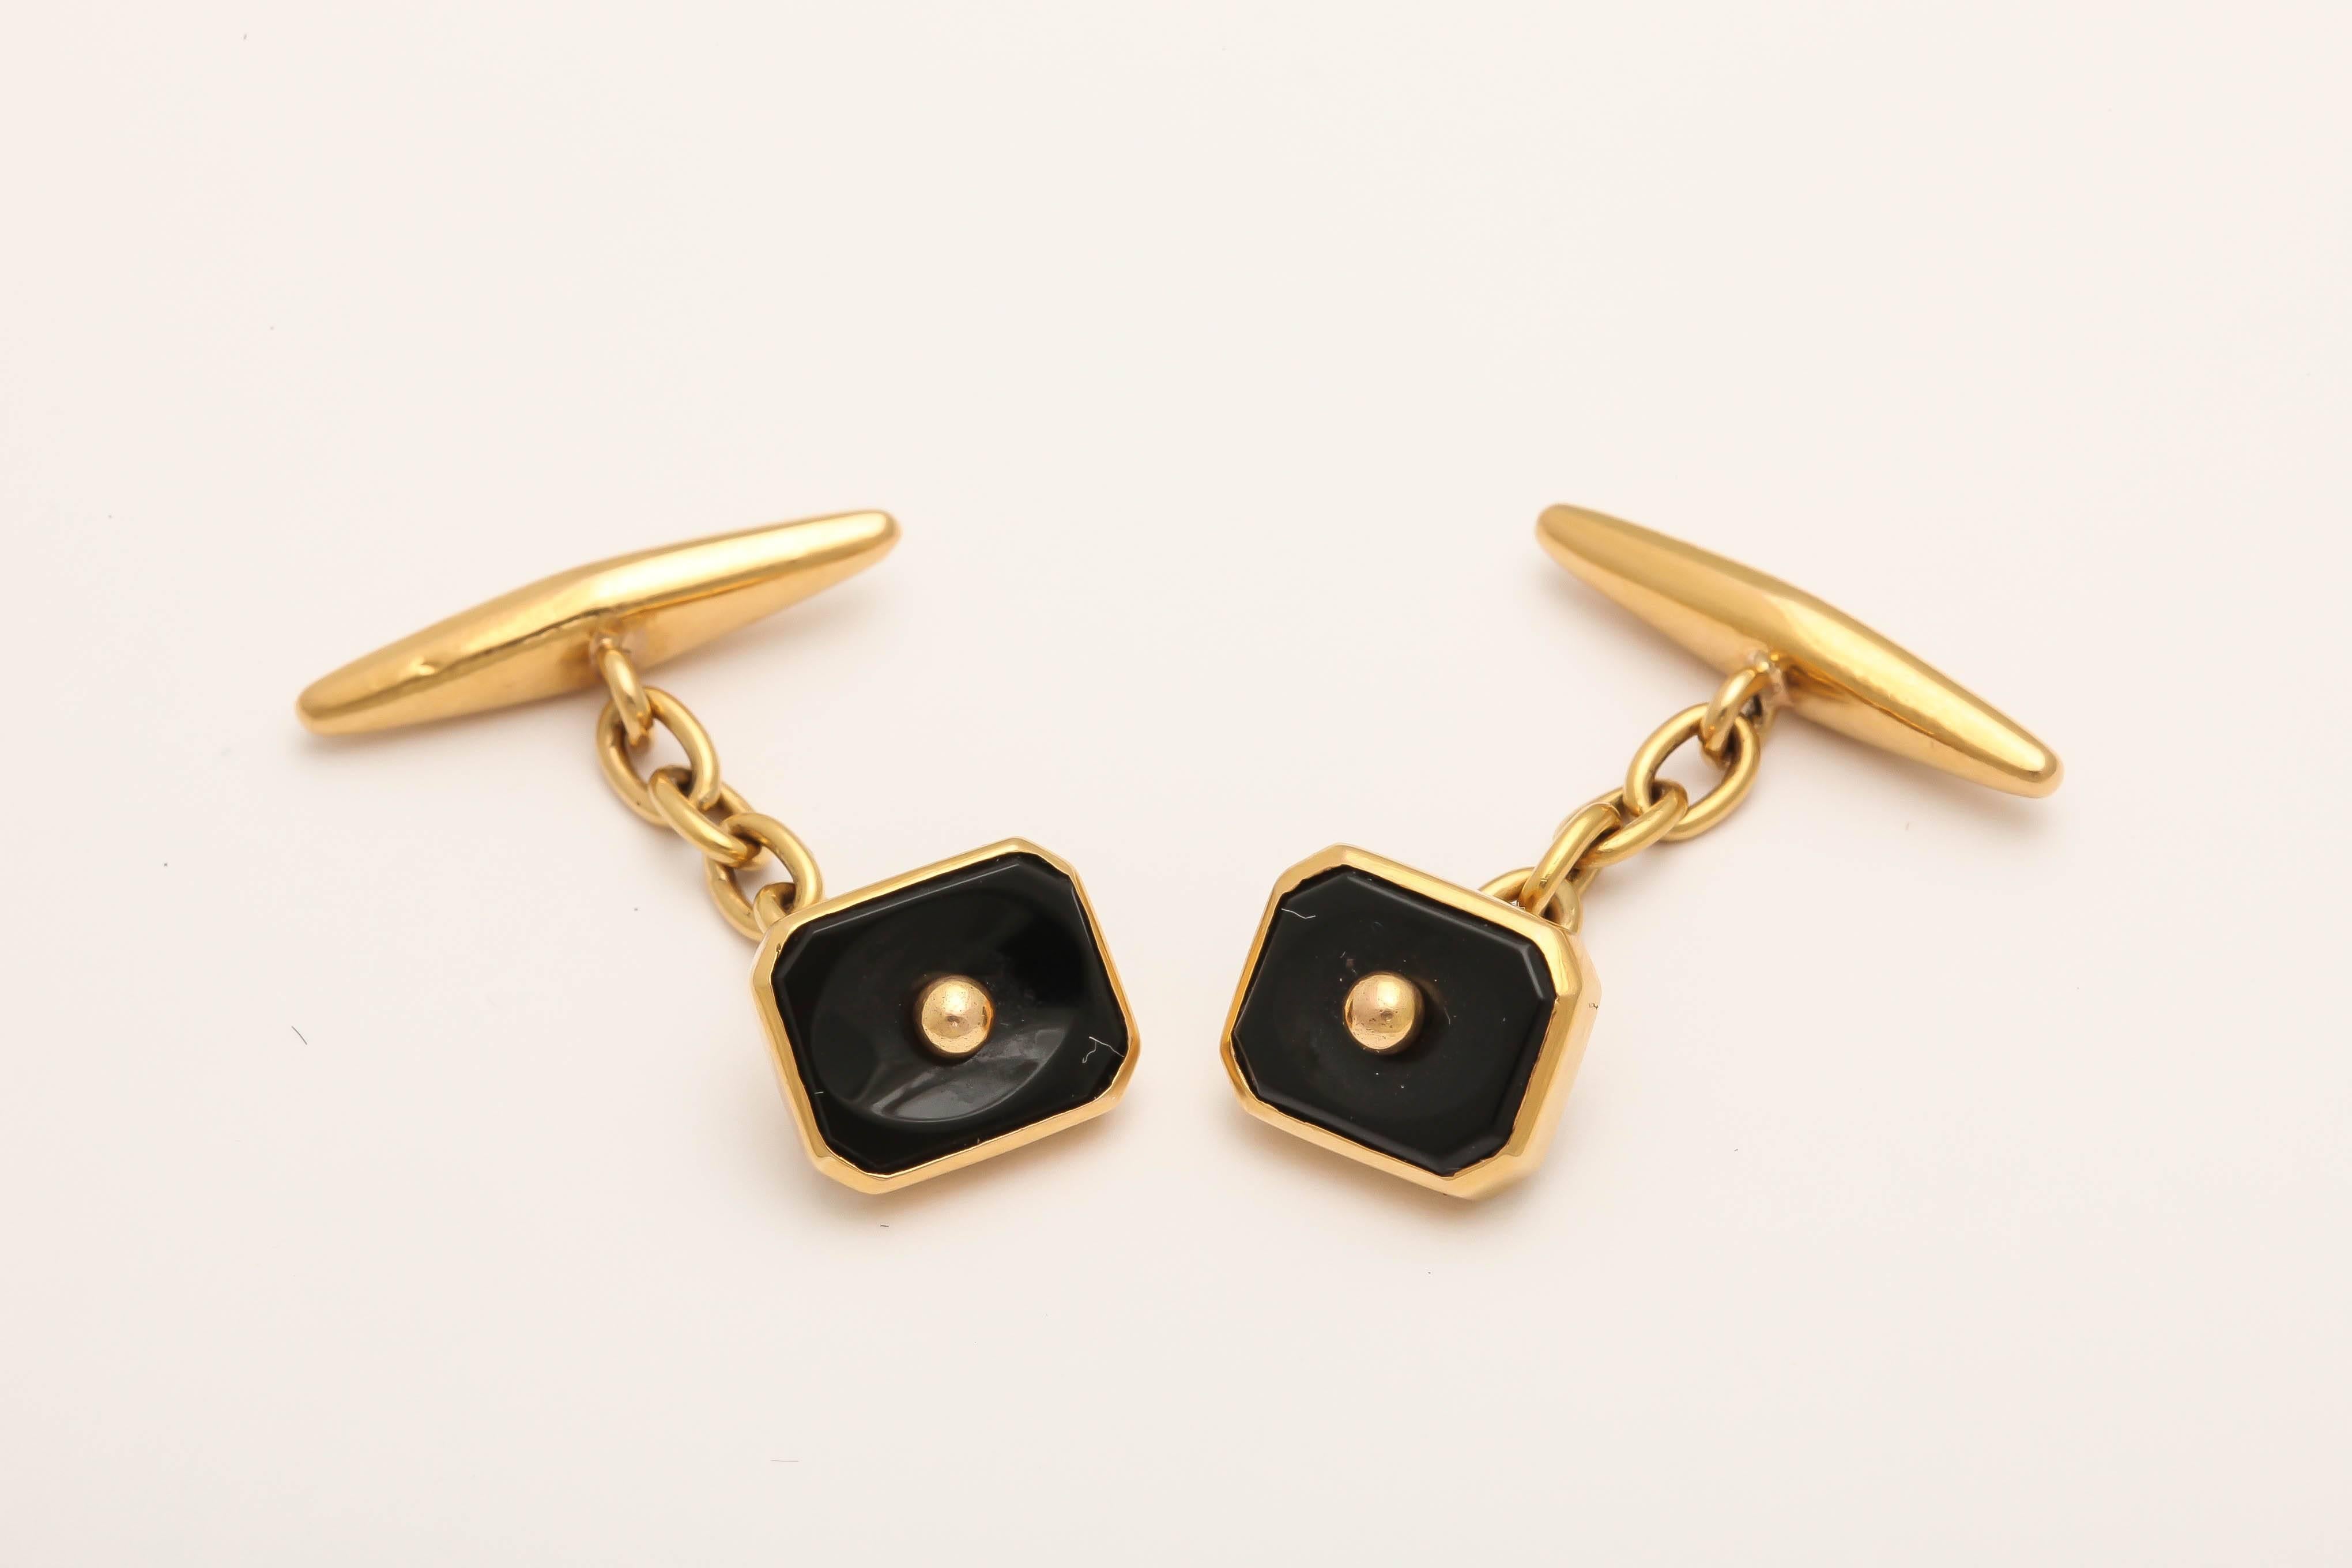 The carved black onyx rectangular links with canted corners in 18k yellow gold, with handmade gold link chains attached to tapered gold bar links.
 
Hallmark for Porto or Lisbon, mid 20th century

The onyx links-10.7 x 9 mm; the chain ½ in (1.2